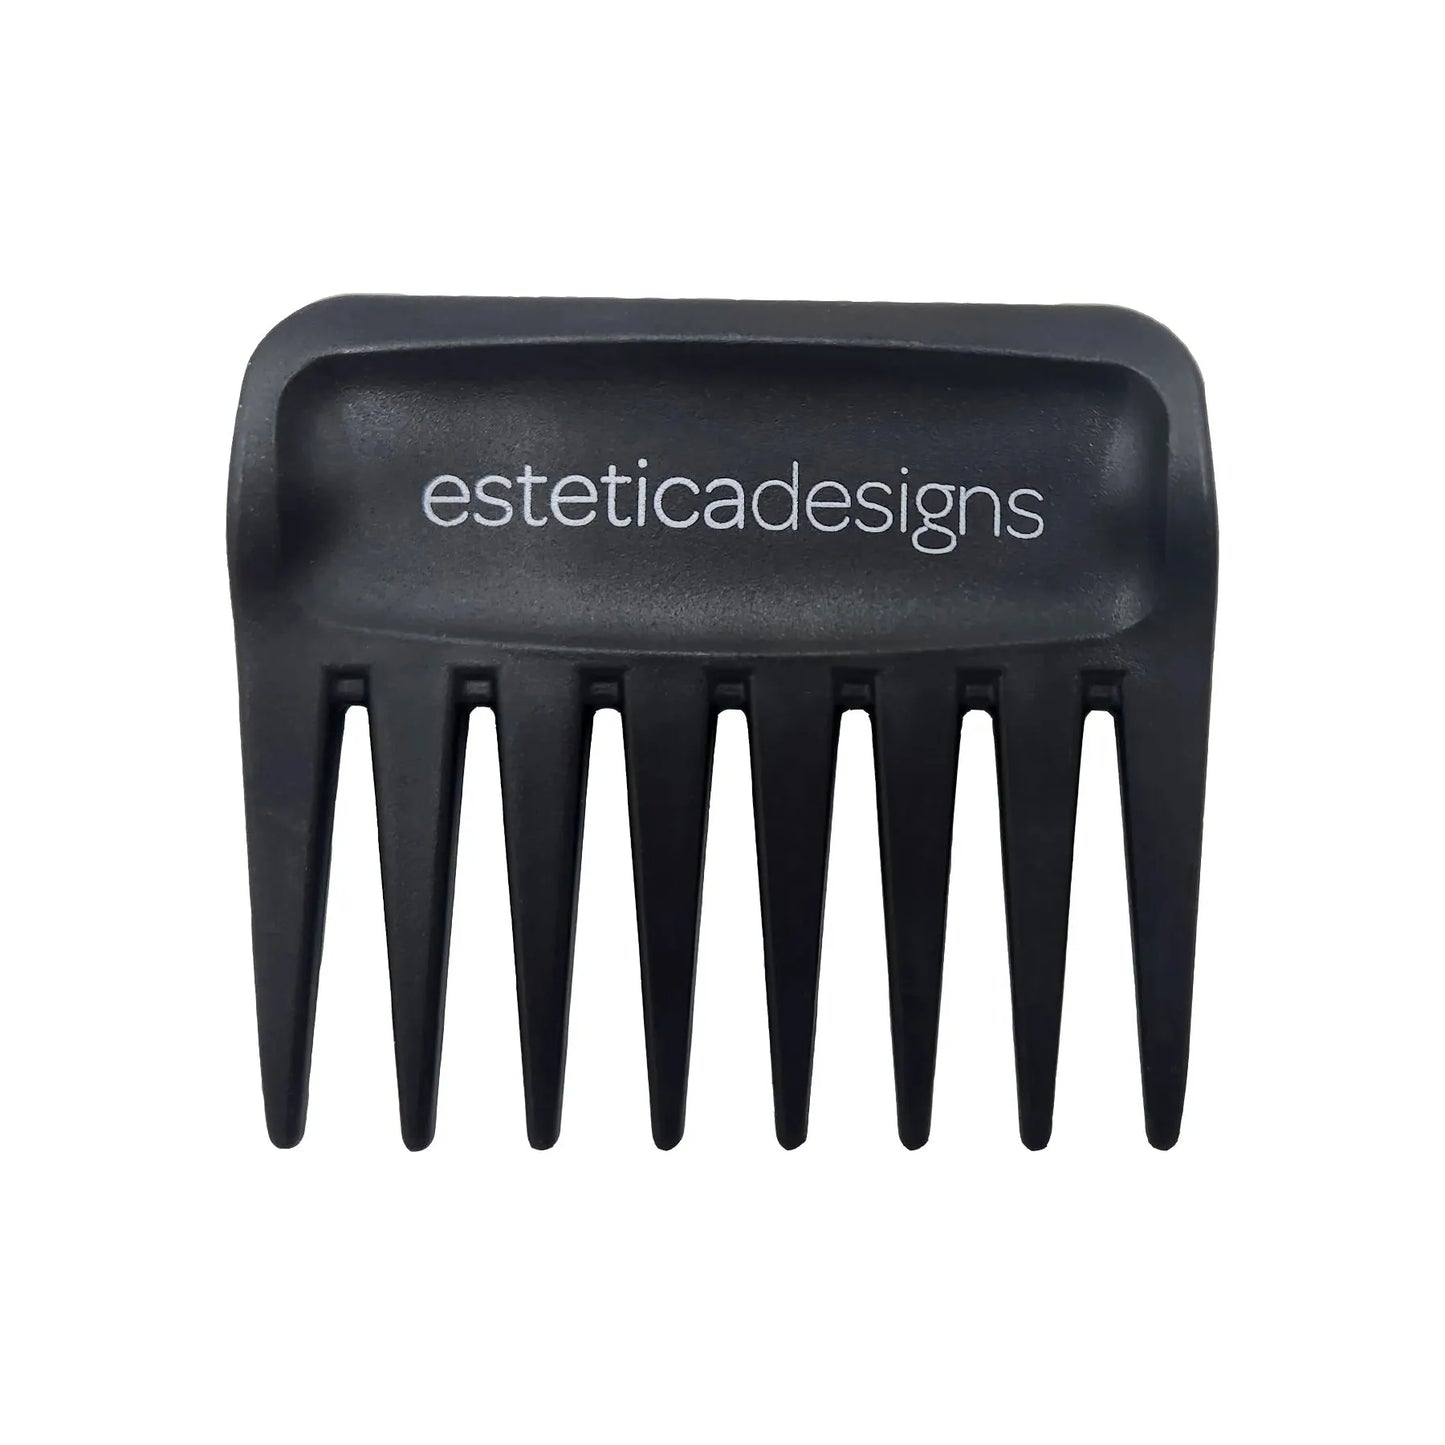 Wide Tooth Comb by Estetica